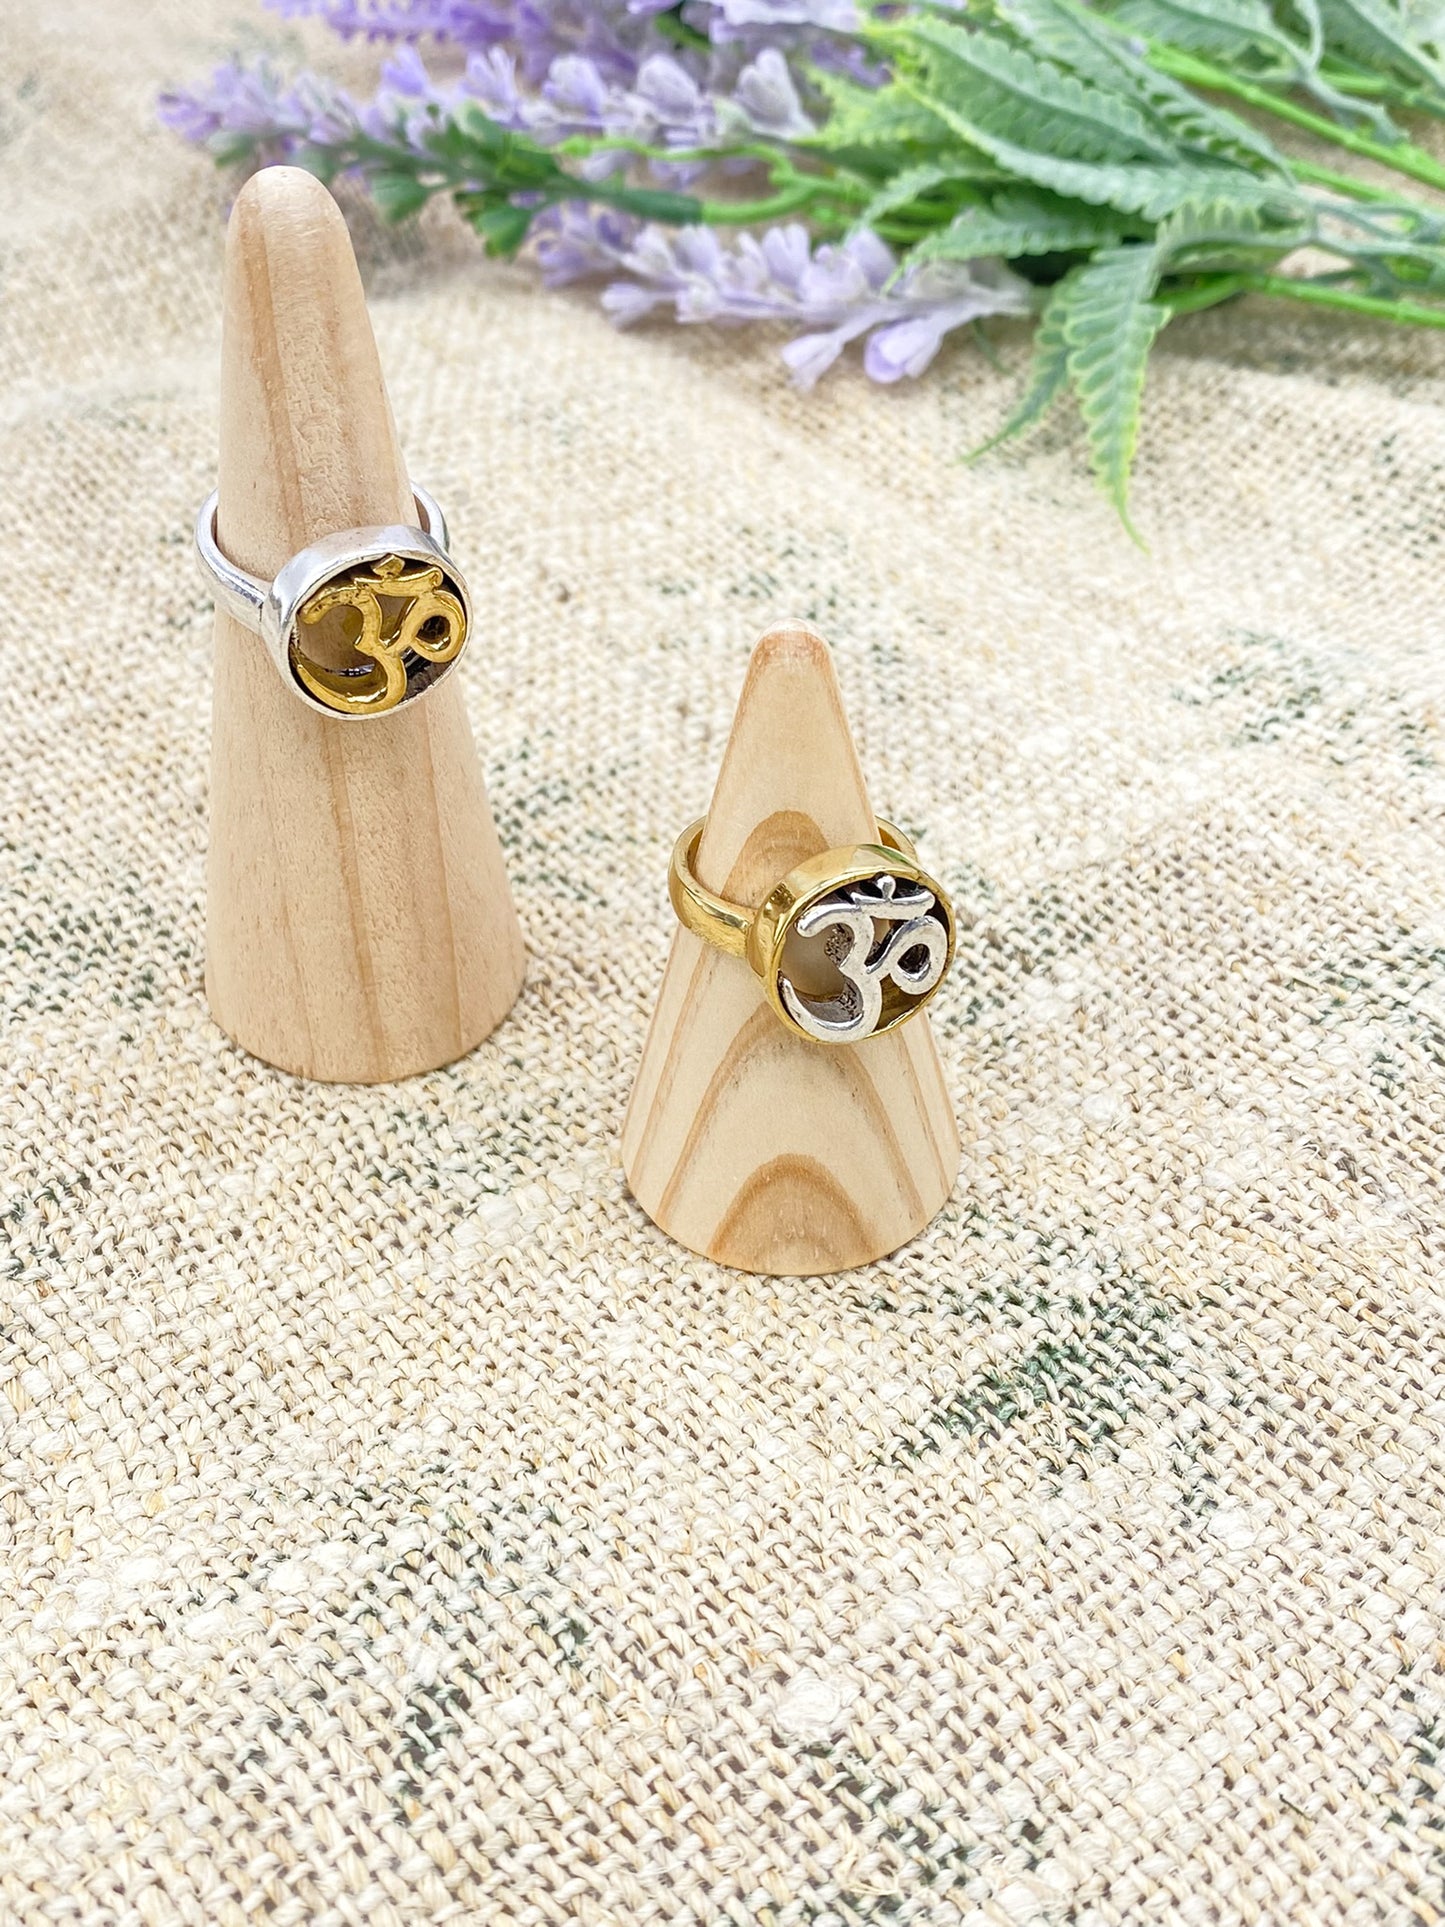 Om Rings, Round Shaped Aum Rings, Sterling Silver Ring, Gold Filled Unisex Om Ring, Protection Ring, Spiritual Yoga Ring, Meditation Jewelry